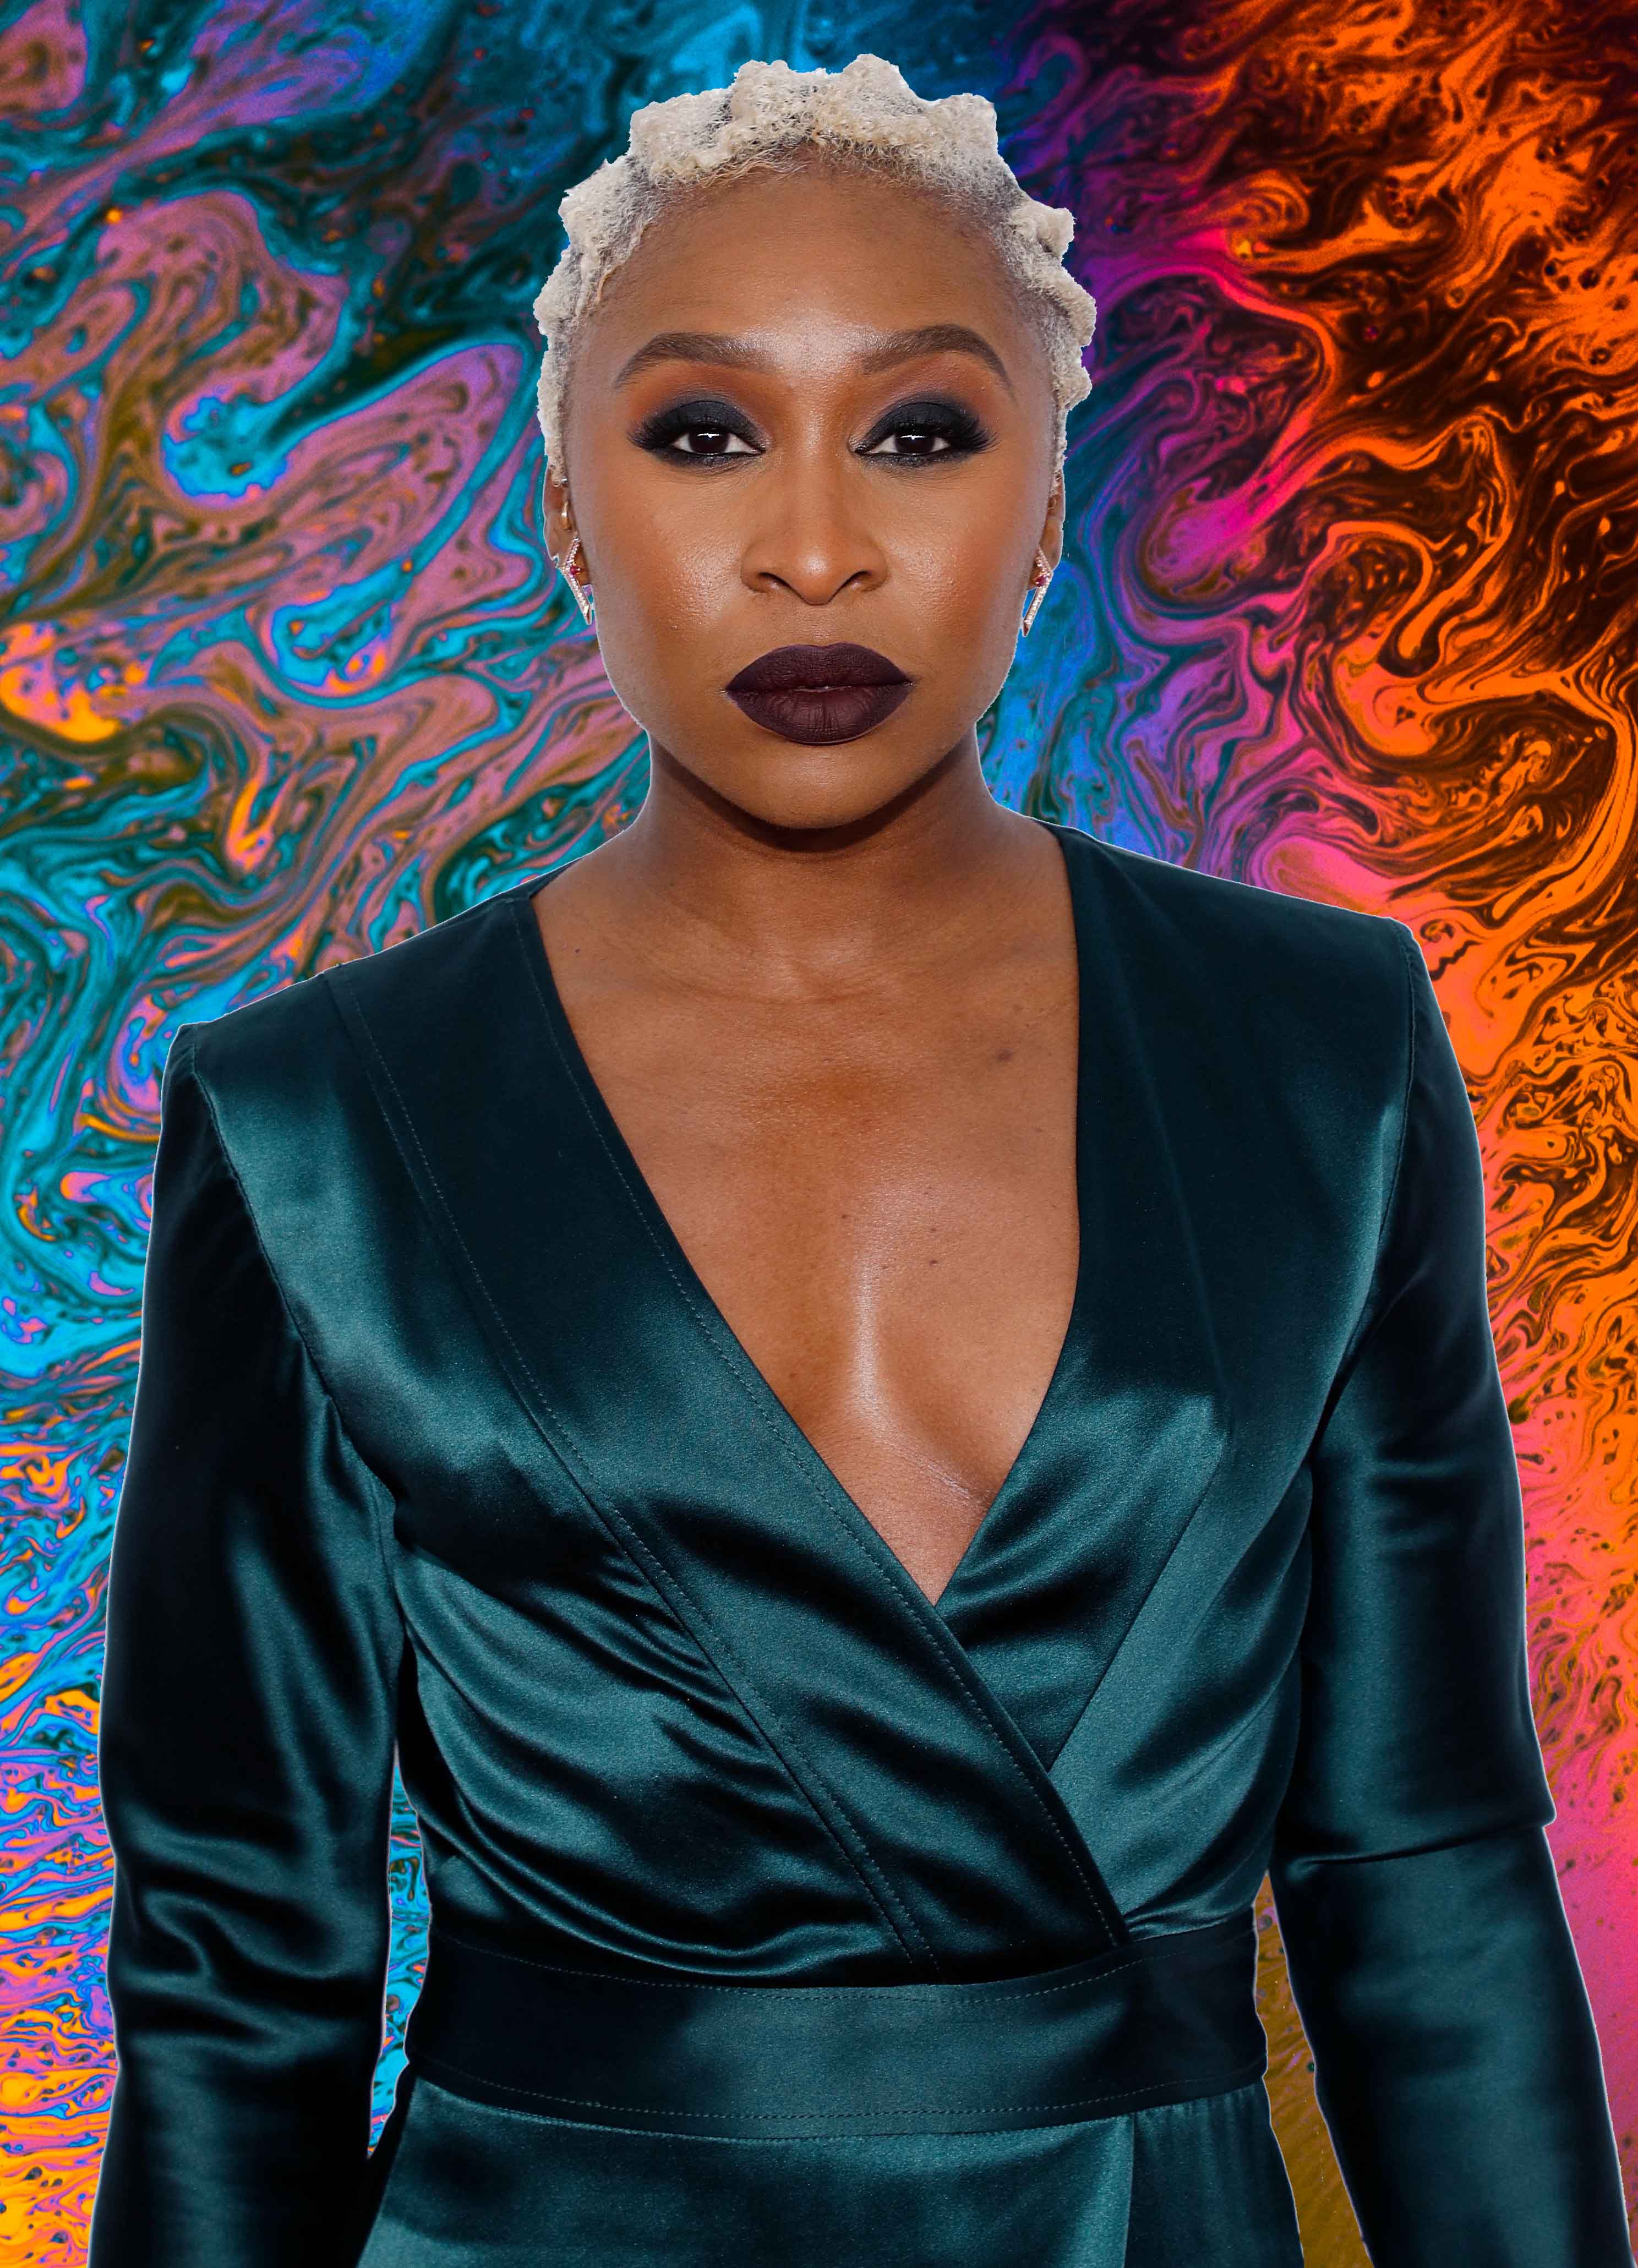 Cynthia Erivo Pushes Back On Criticism Of Her New Role As Harriet Tubman